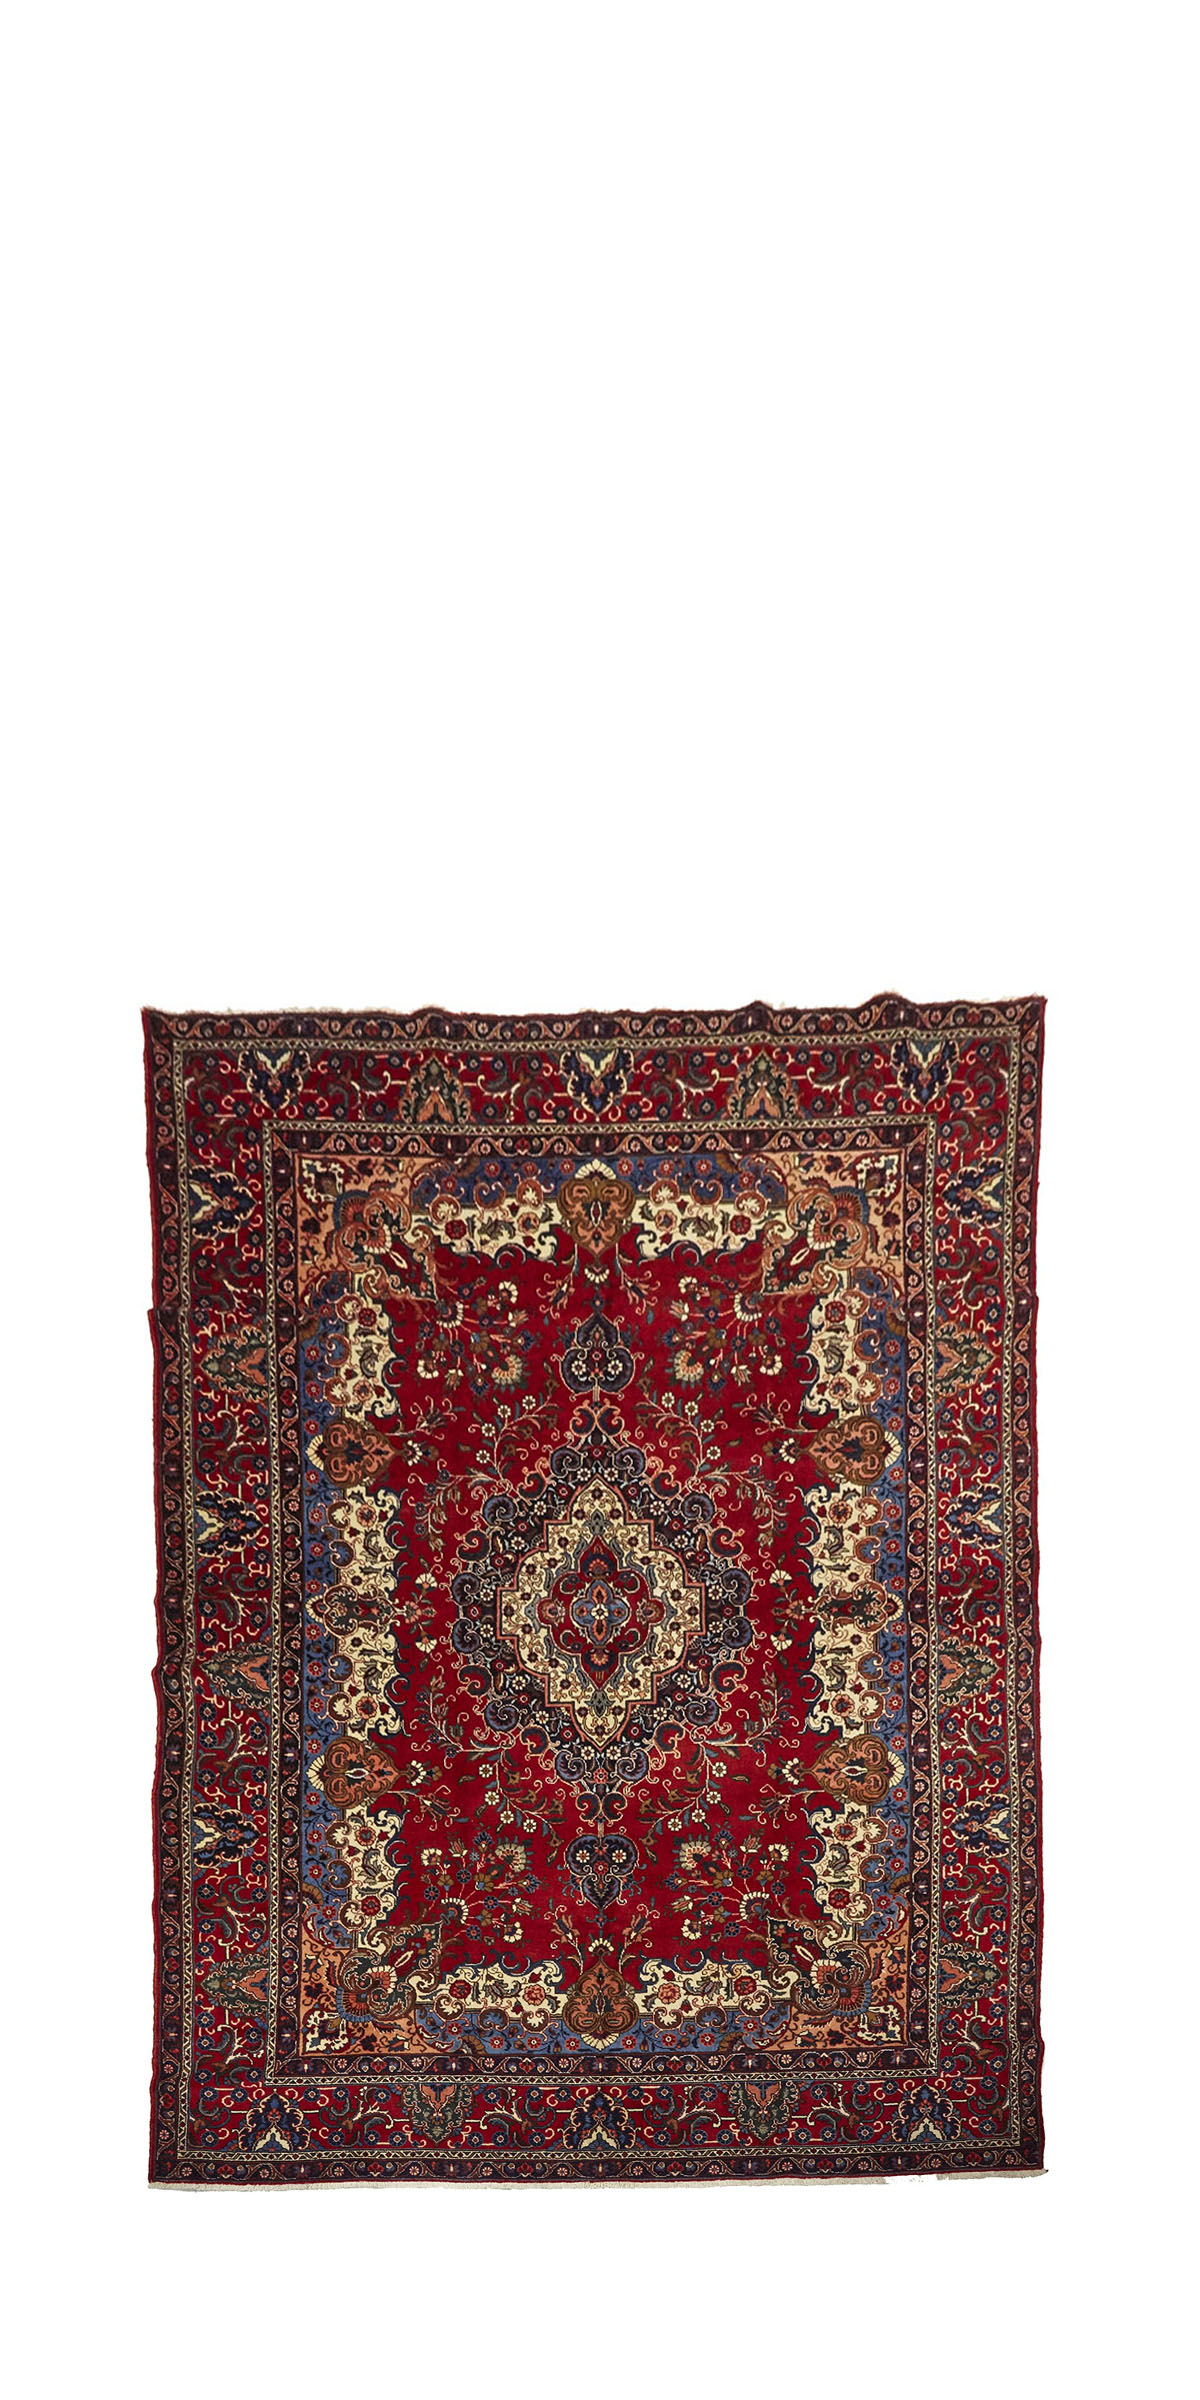 North Persian Carpet, middle to late 20th century